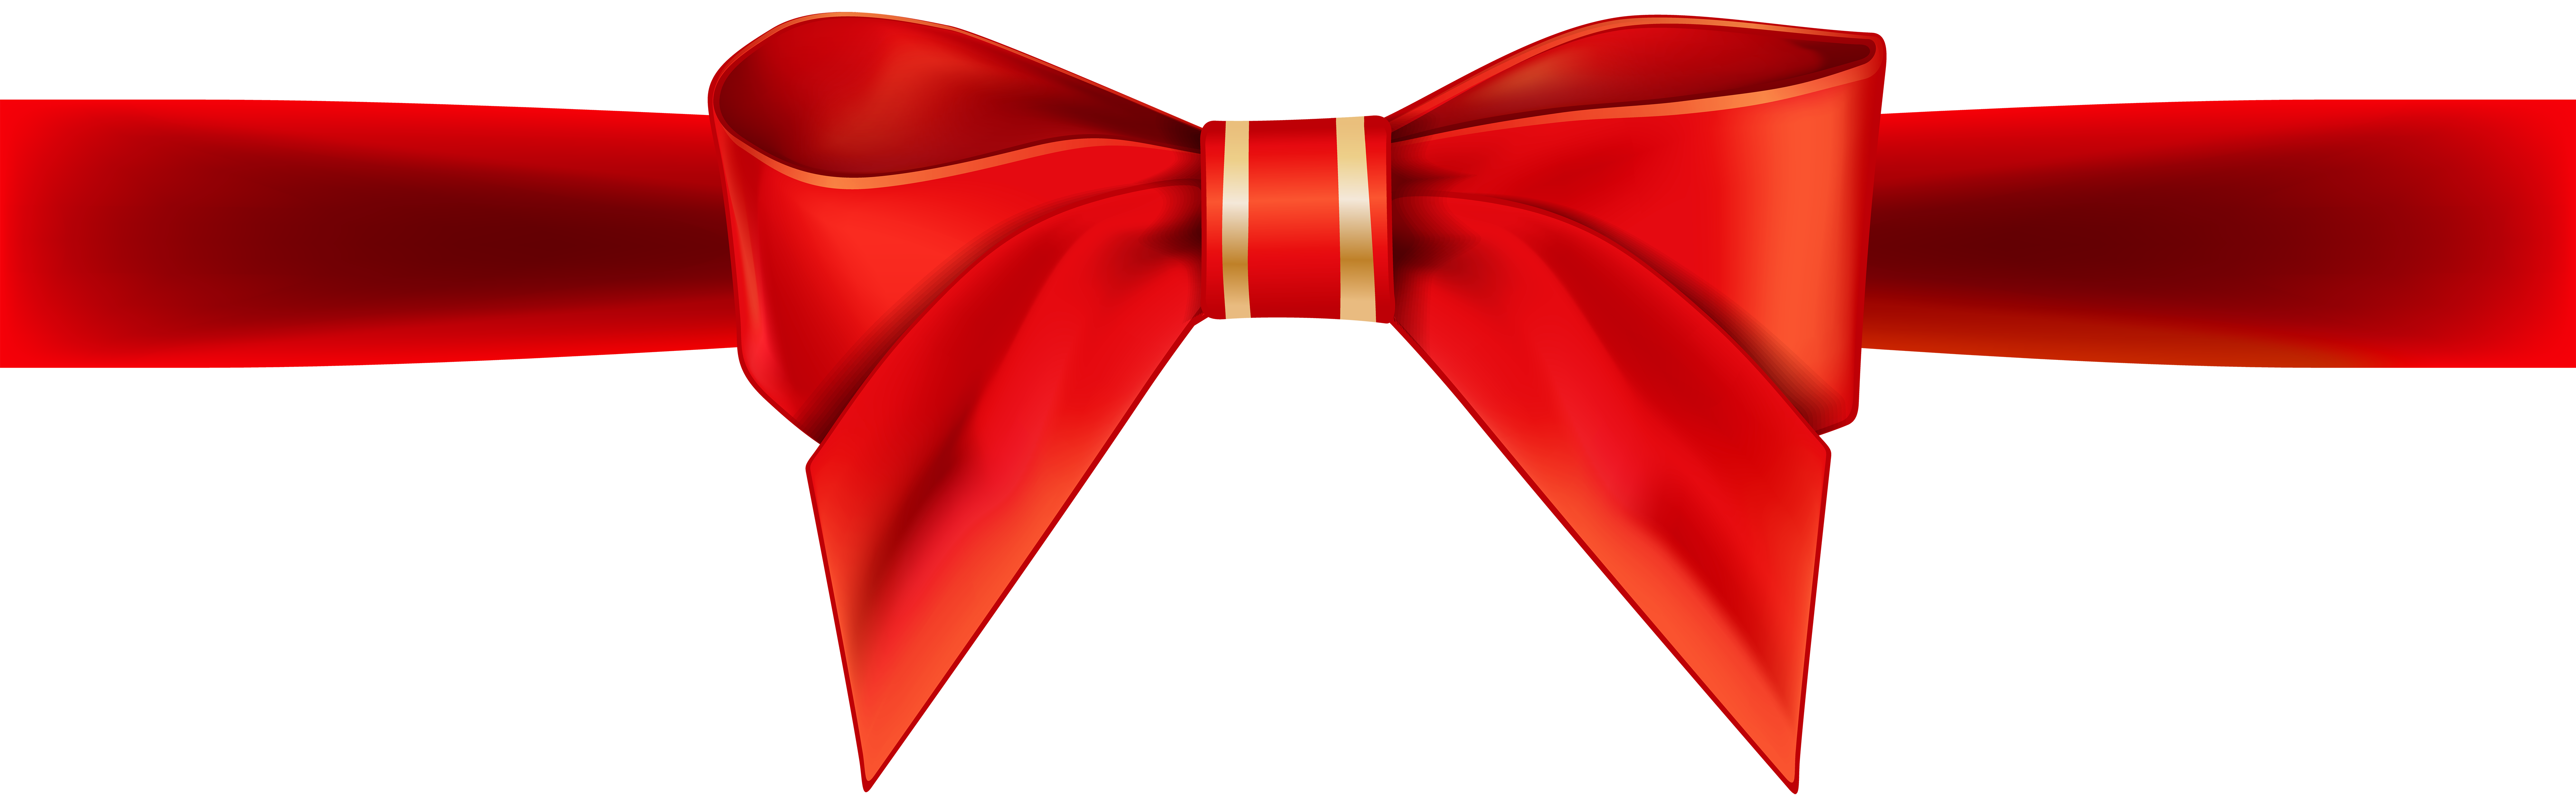 Red Ribbon Bow Transparent PNG Clip Art Image | Gallery ...